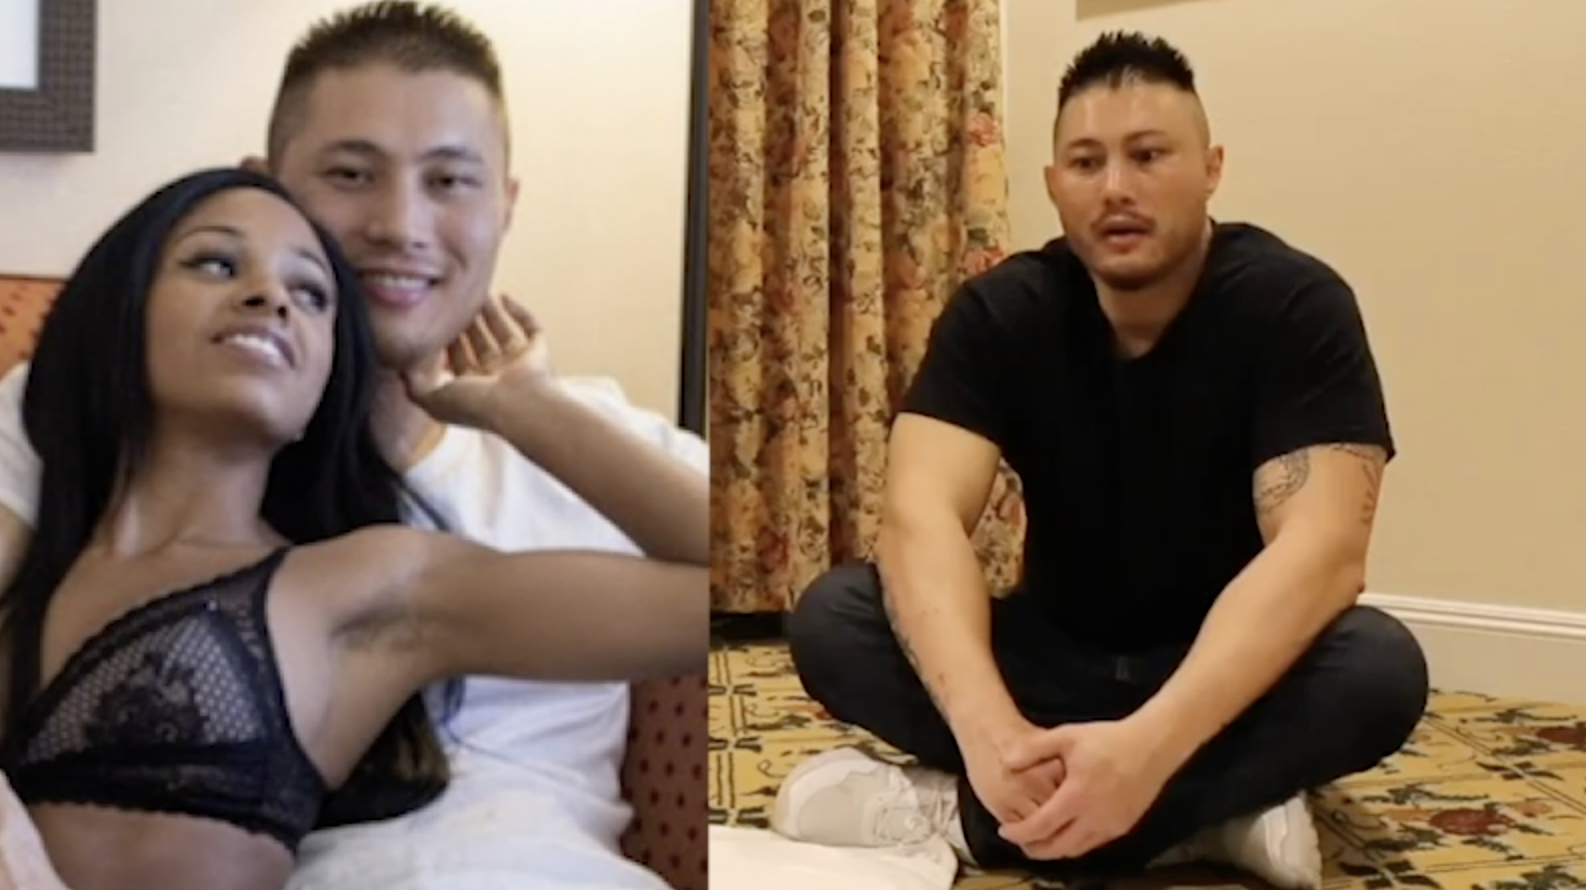 1586px x 890px - EXCLUSIVE: Pâ€Œoâ€Œrn Star Jeremy Long Pens Last Statement After Cutting Finger  Off and Retiring 'Forever'